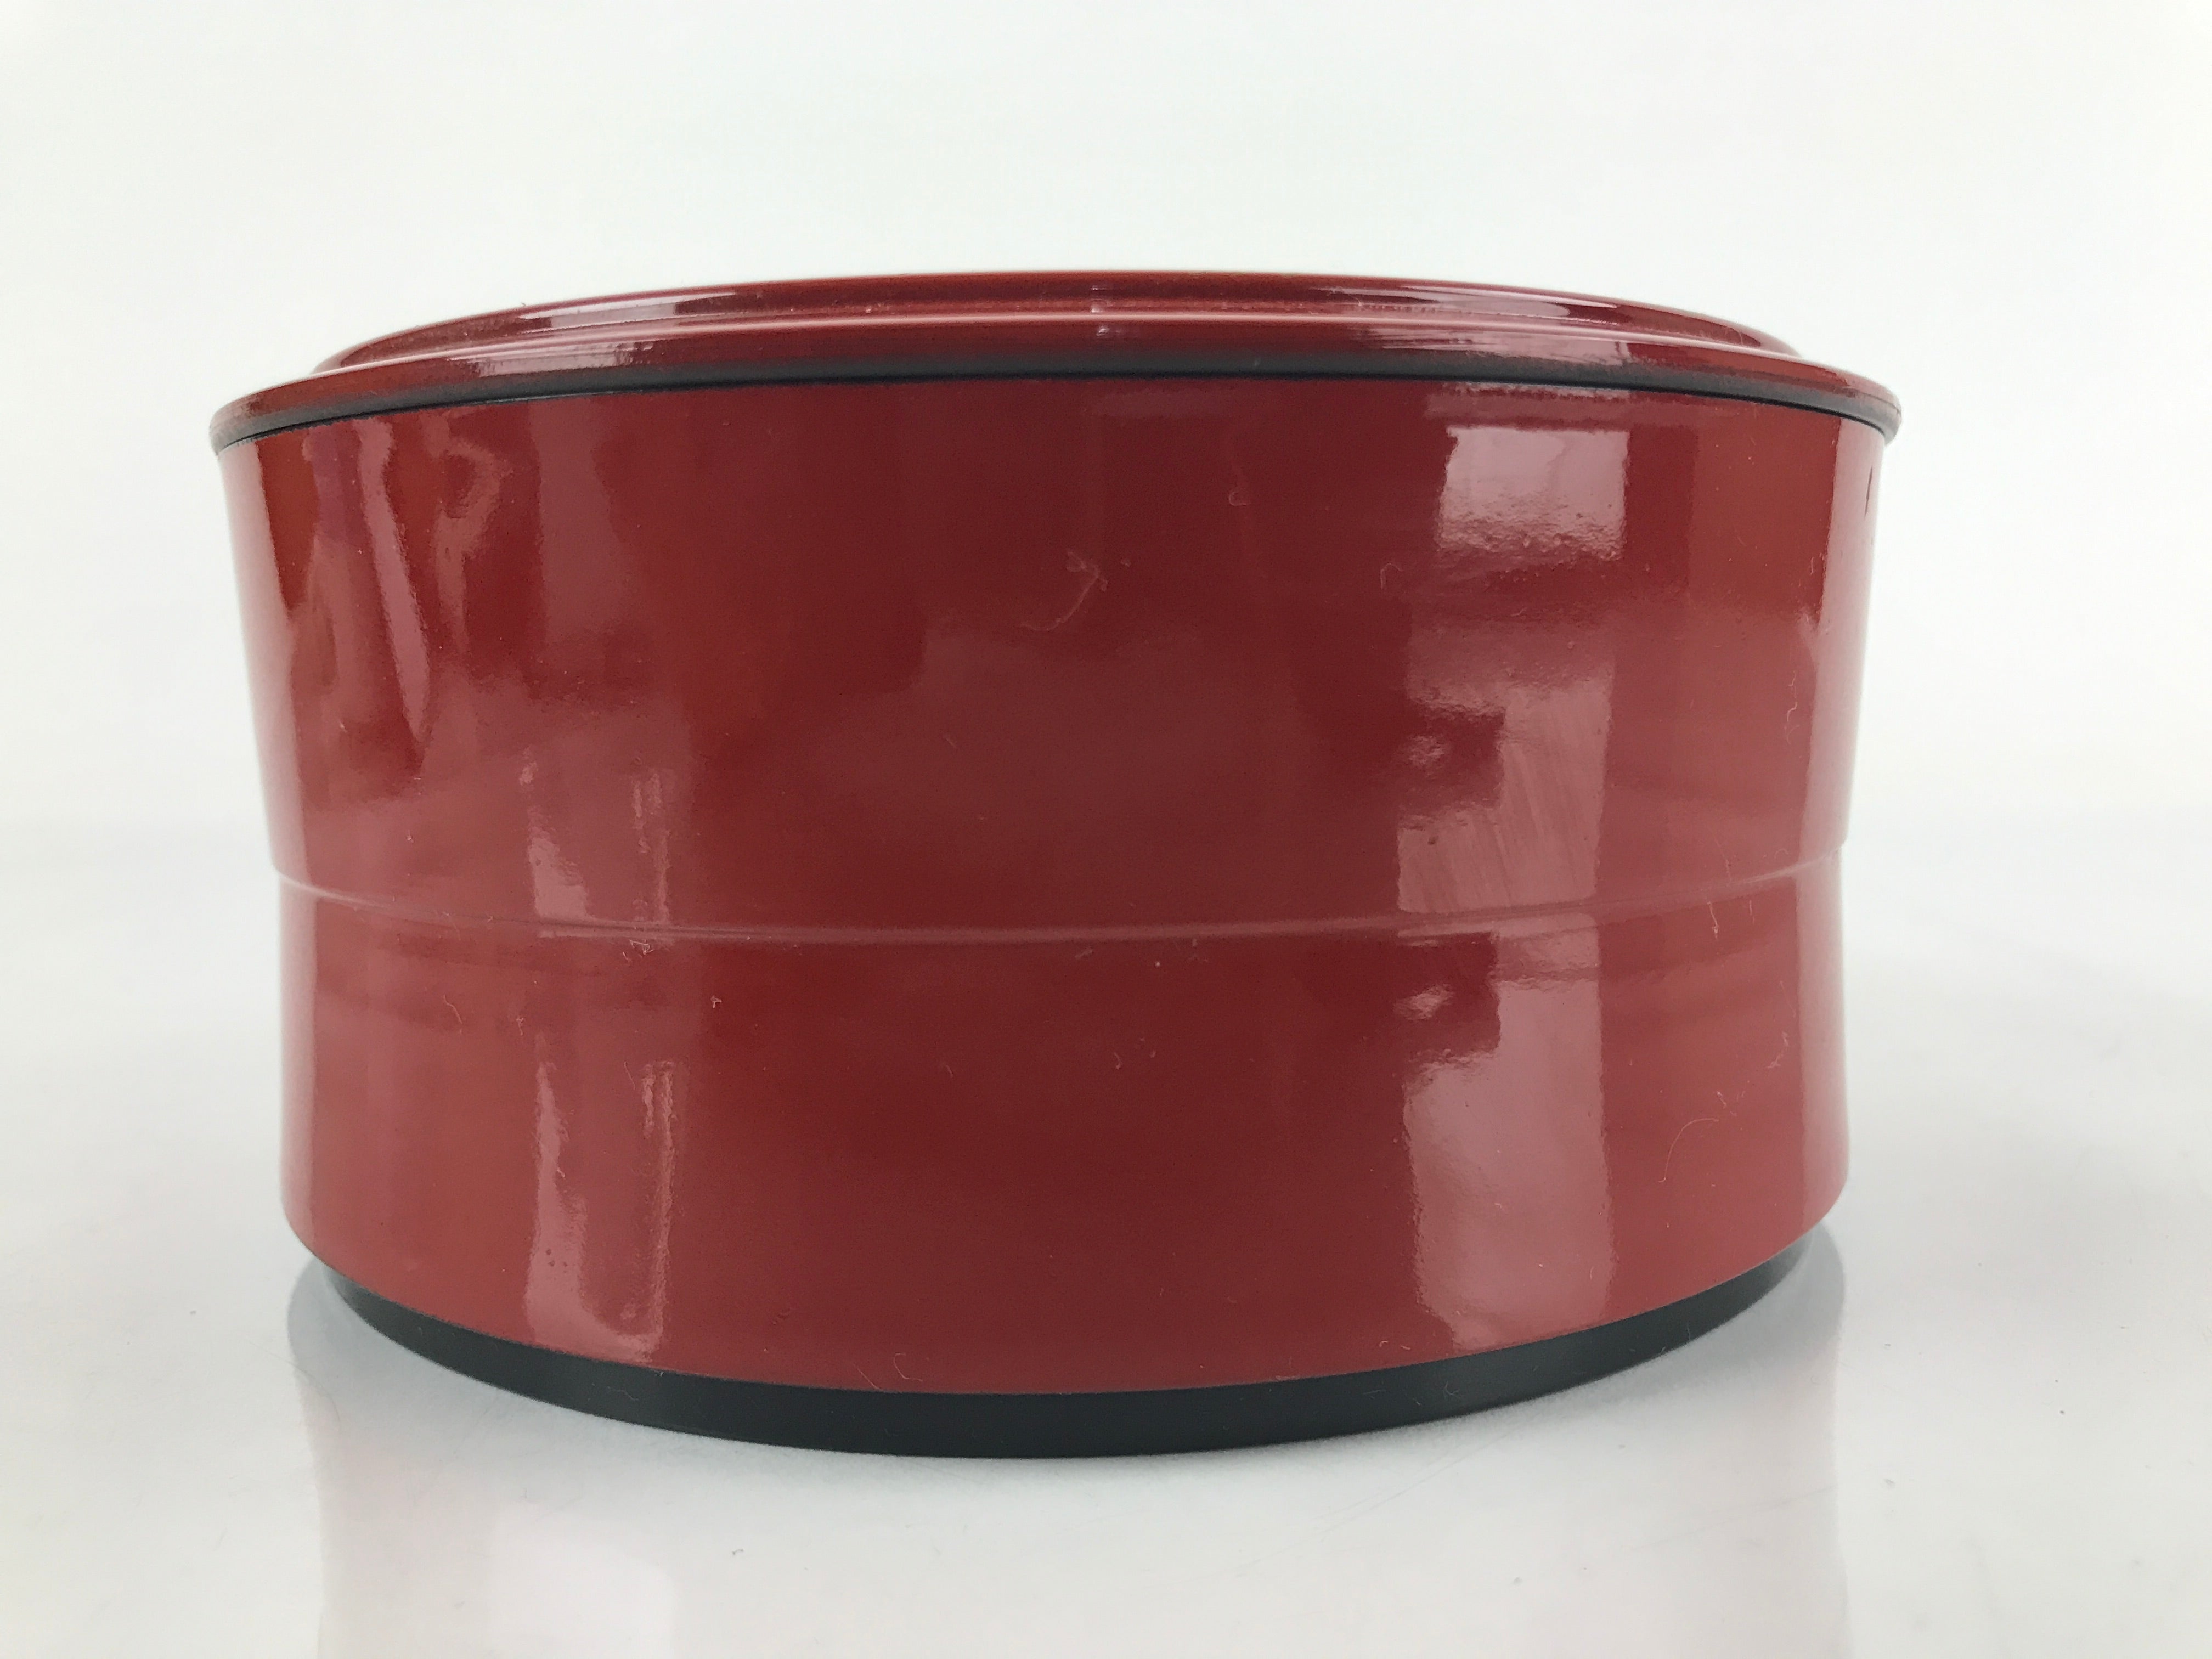 Japanese Resin Lacquer Replica Lidded Bento Lunch Box Vtg Round Plum Red L223